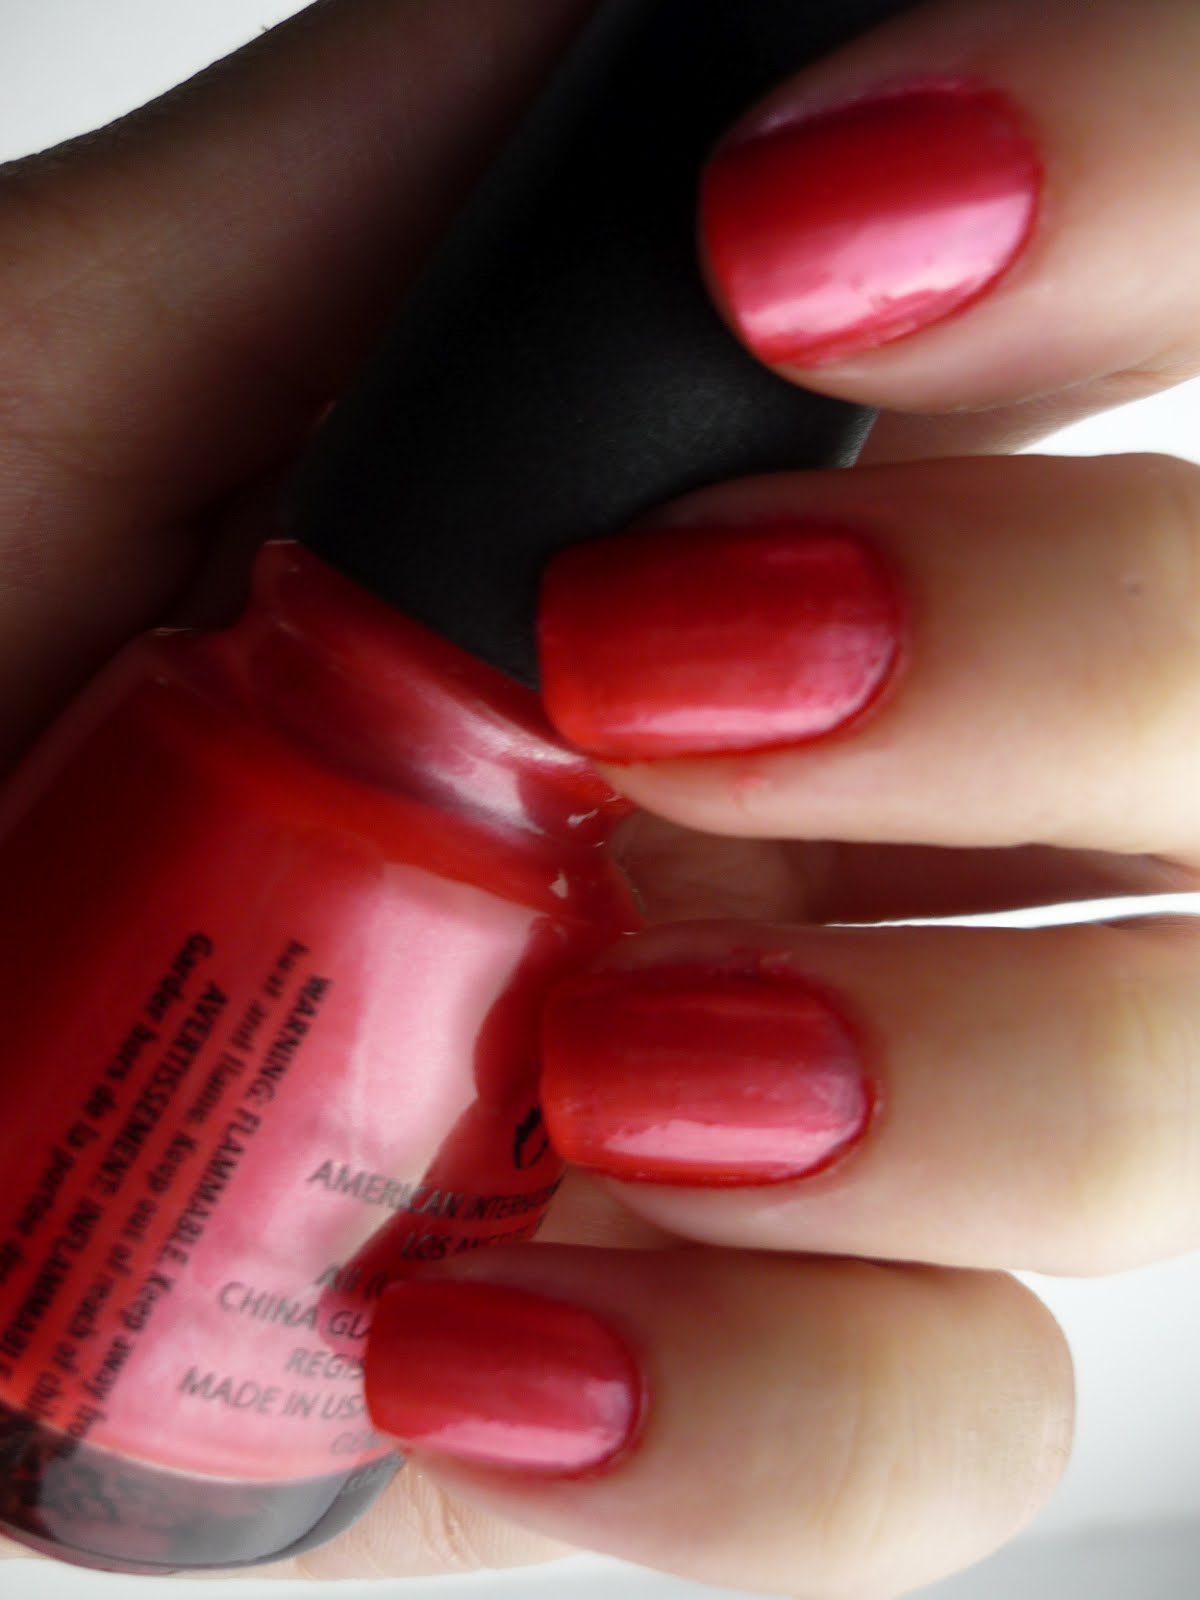 True Beauty Lies Within You ♥ Current Nail Polish